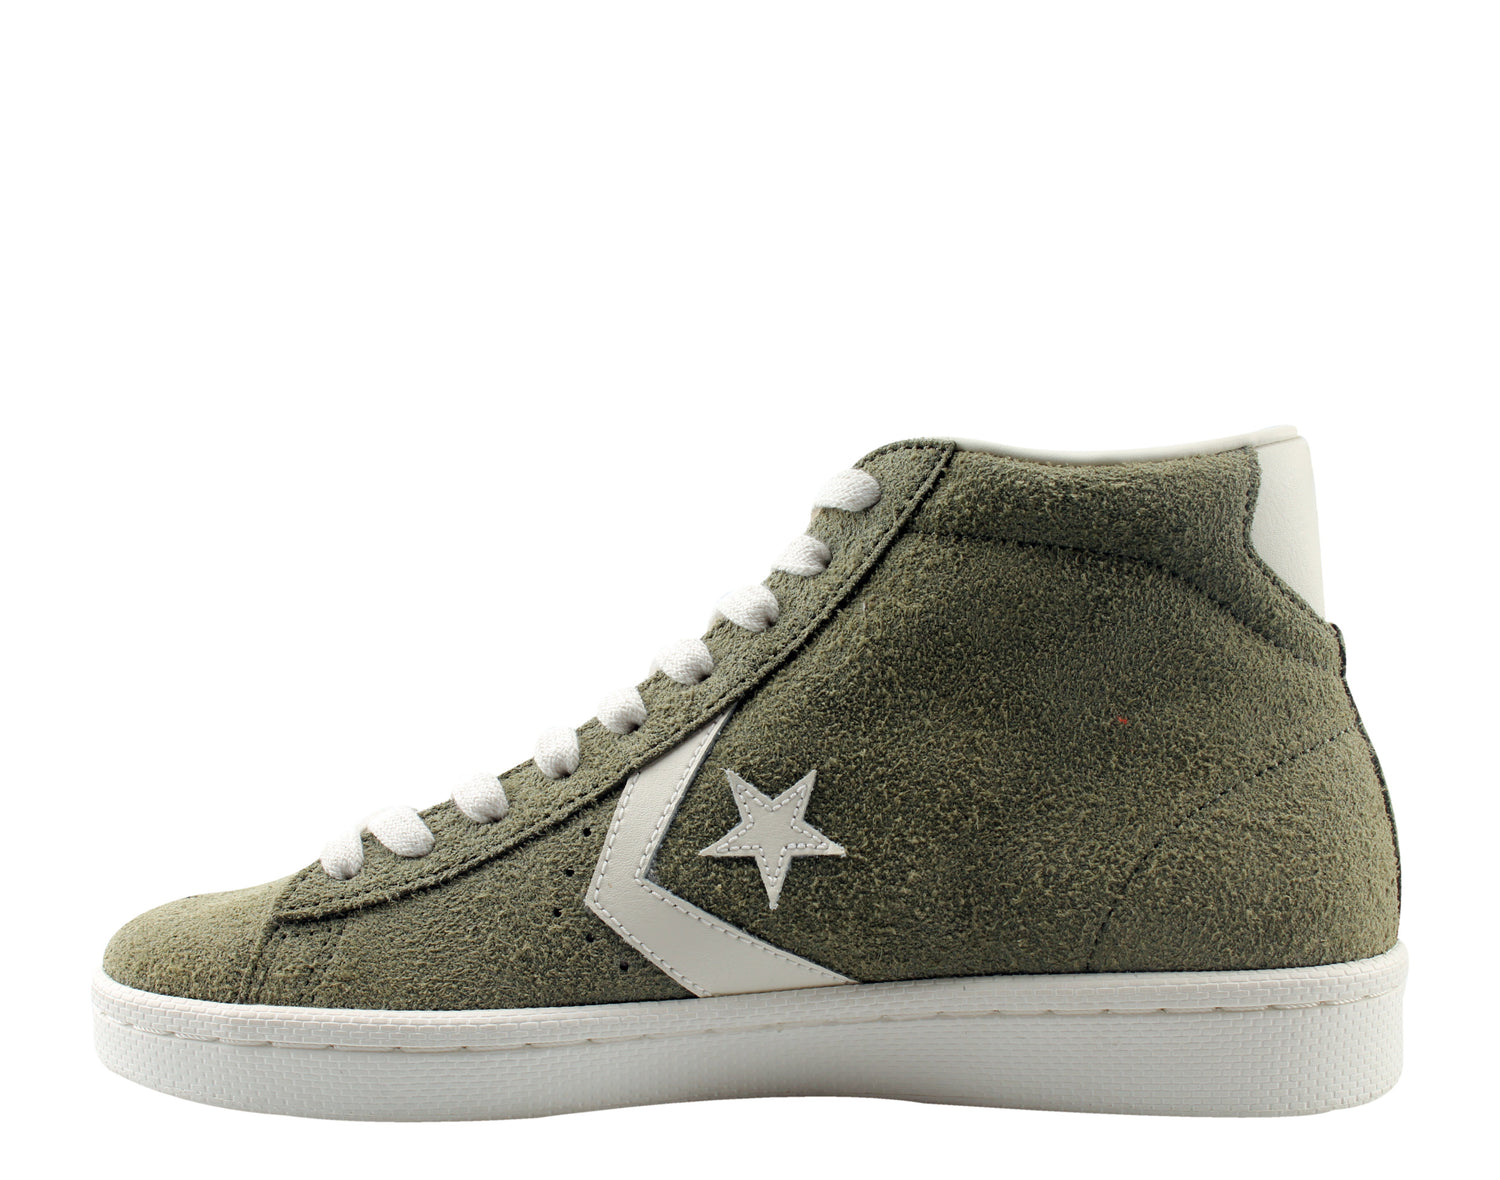 Converse Pro Leather Mid Men's Sneakers